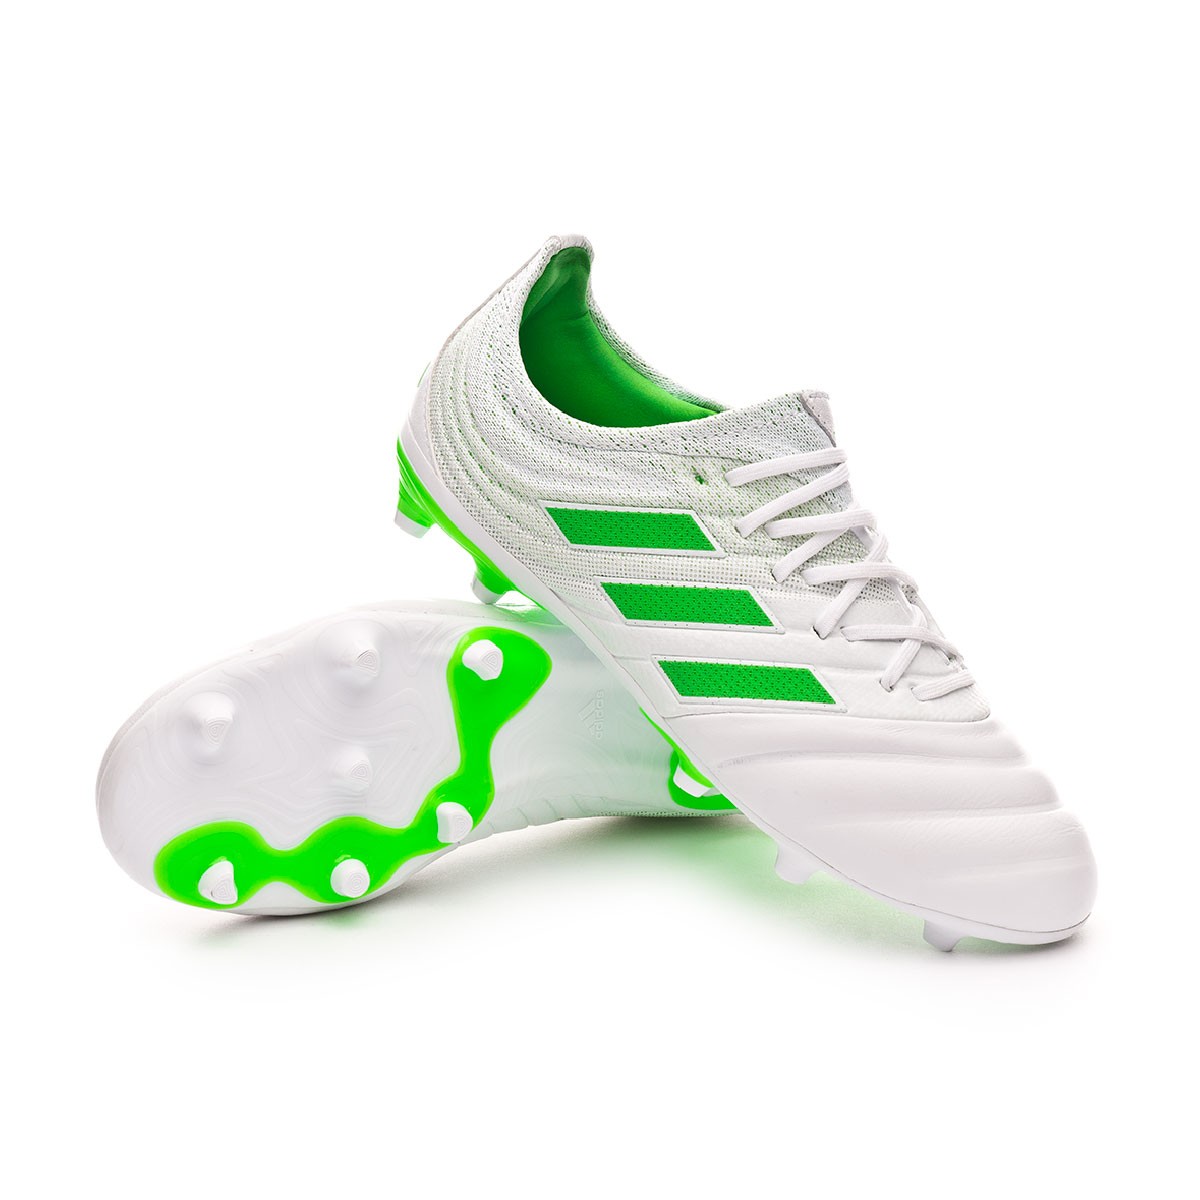 adidas copa 19.1 white and green